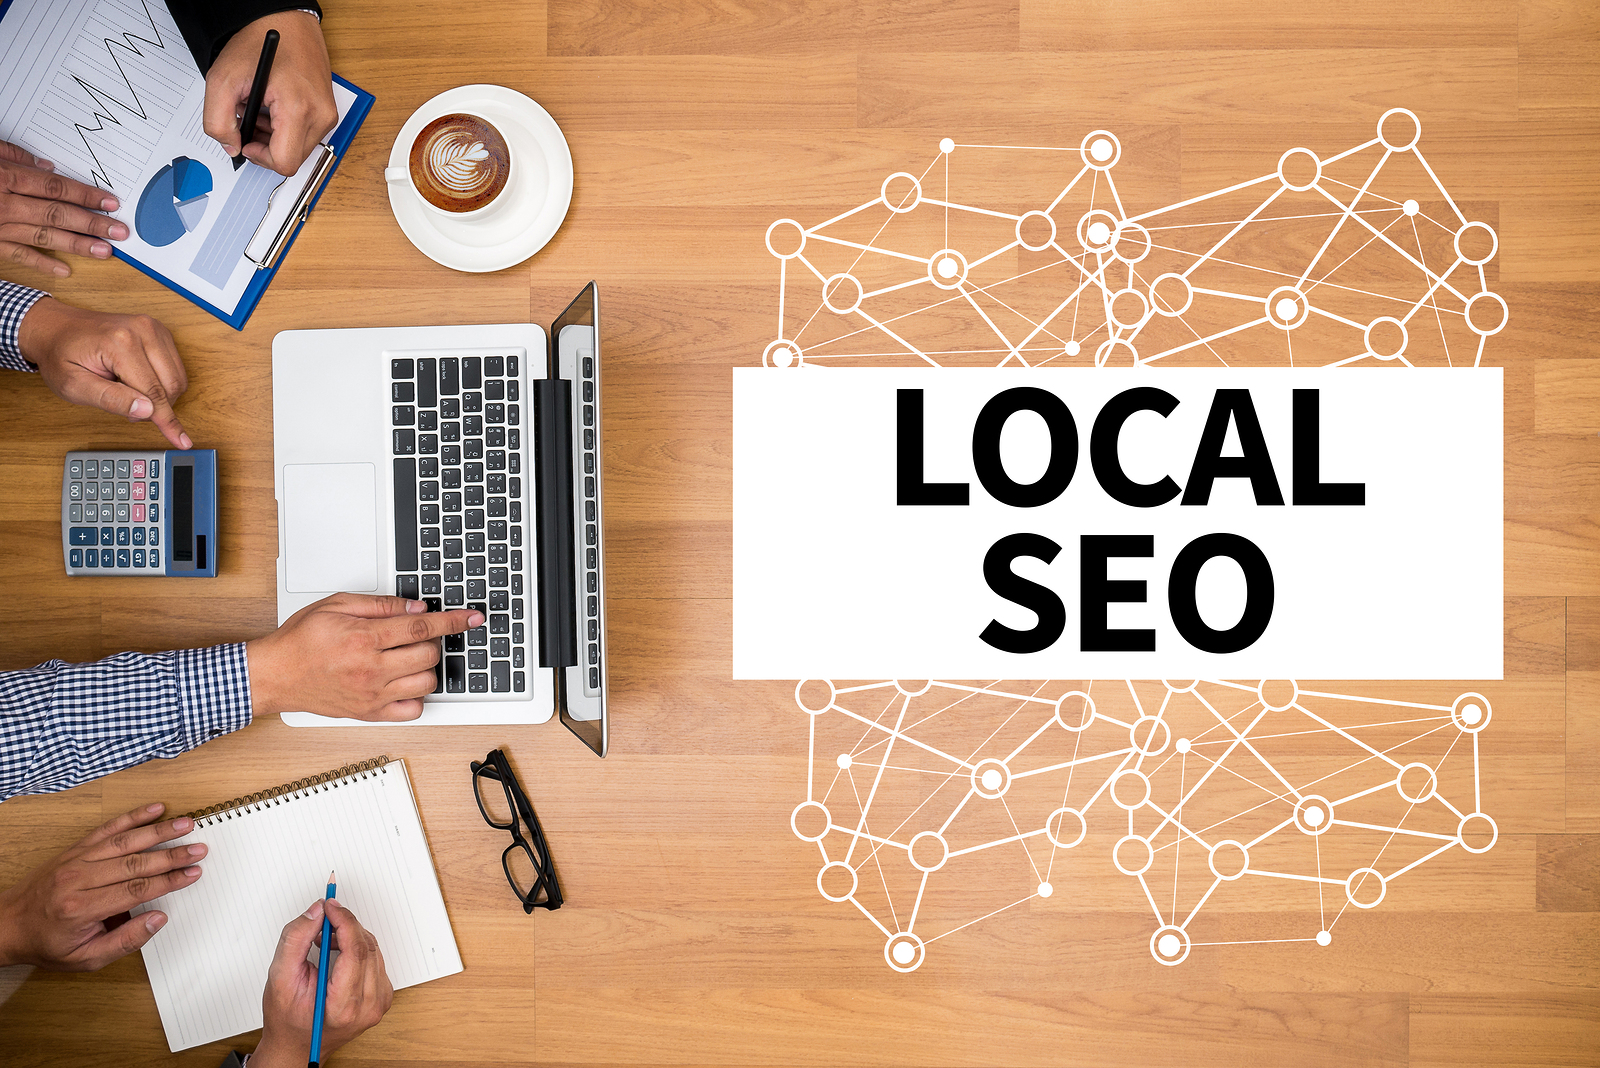 Make your email marketing effective by the Local SEO Services